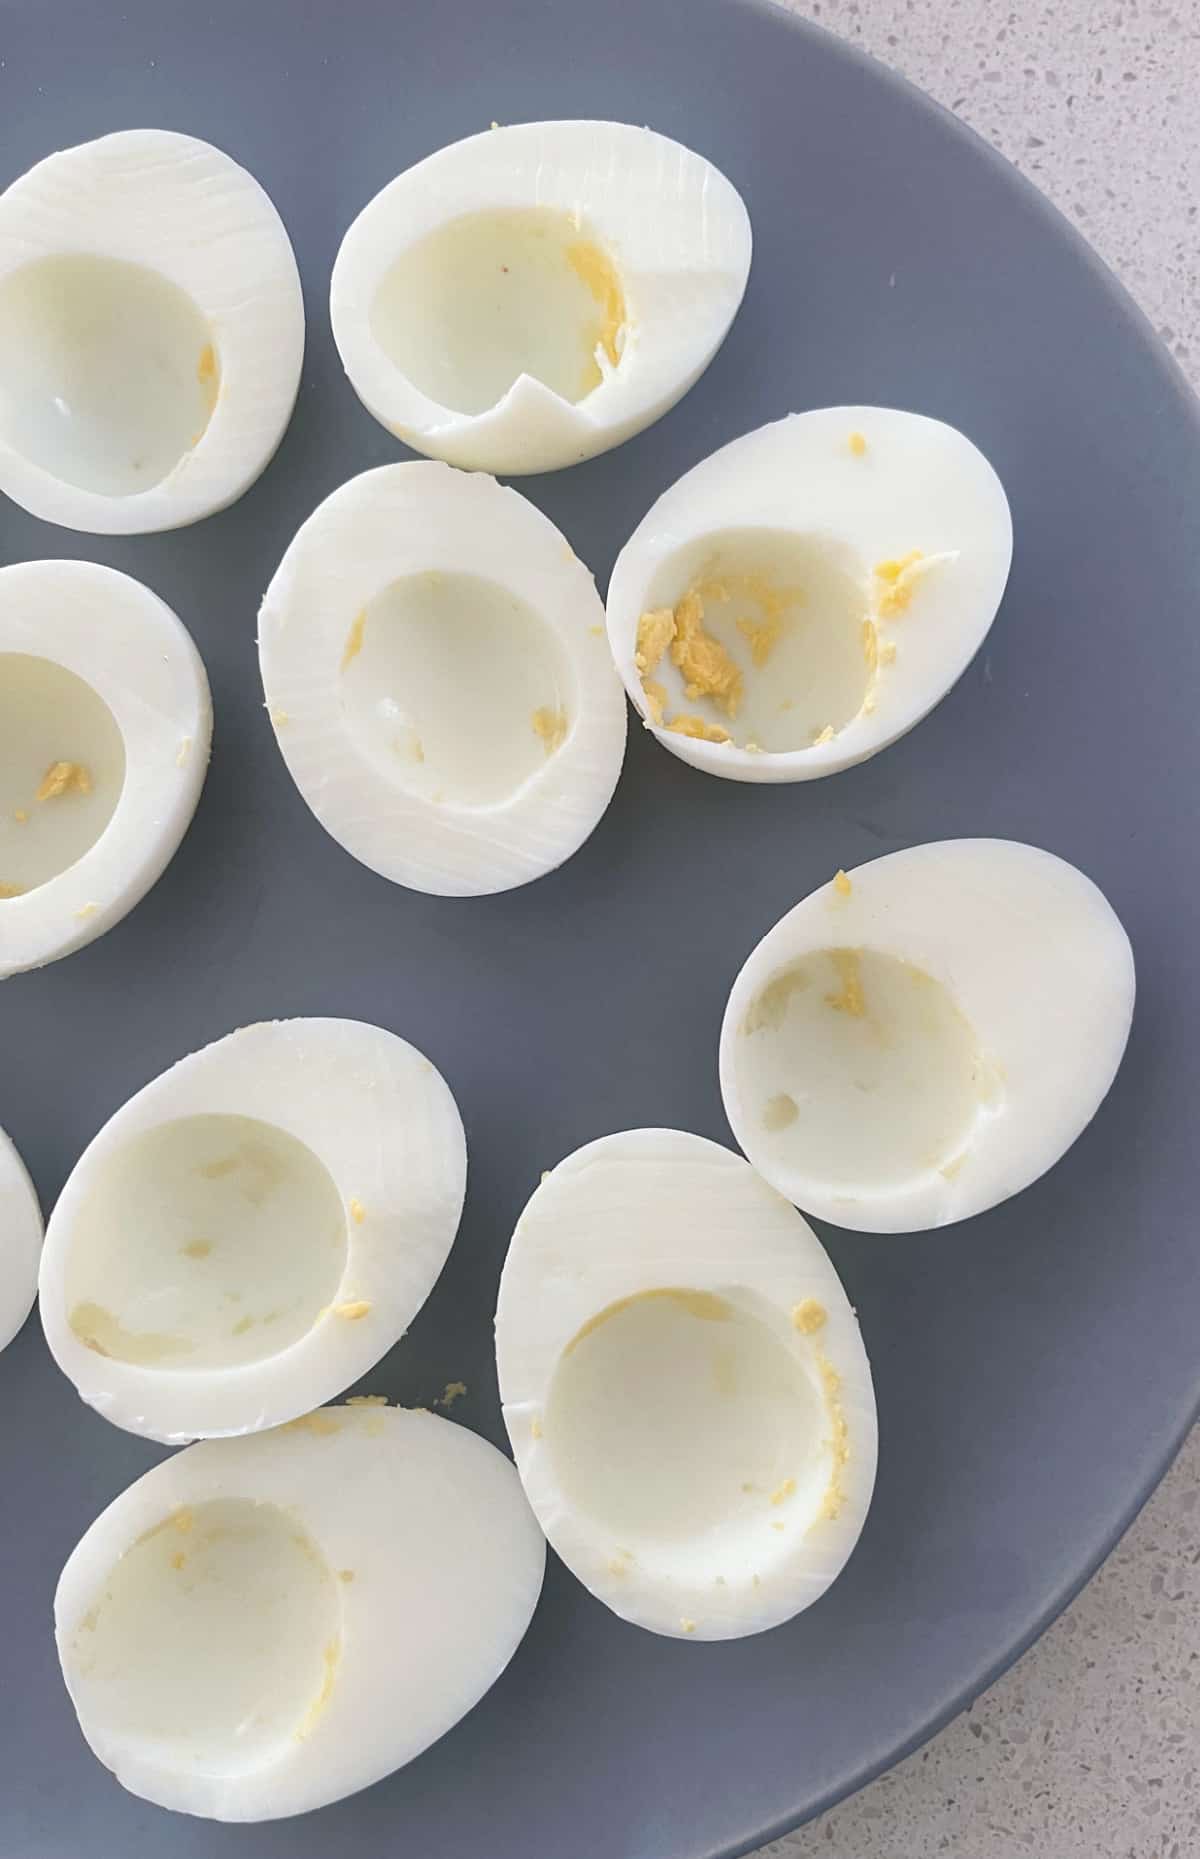 Hollowed out egg whites.